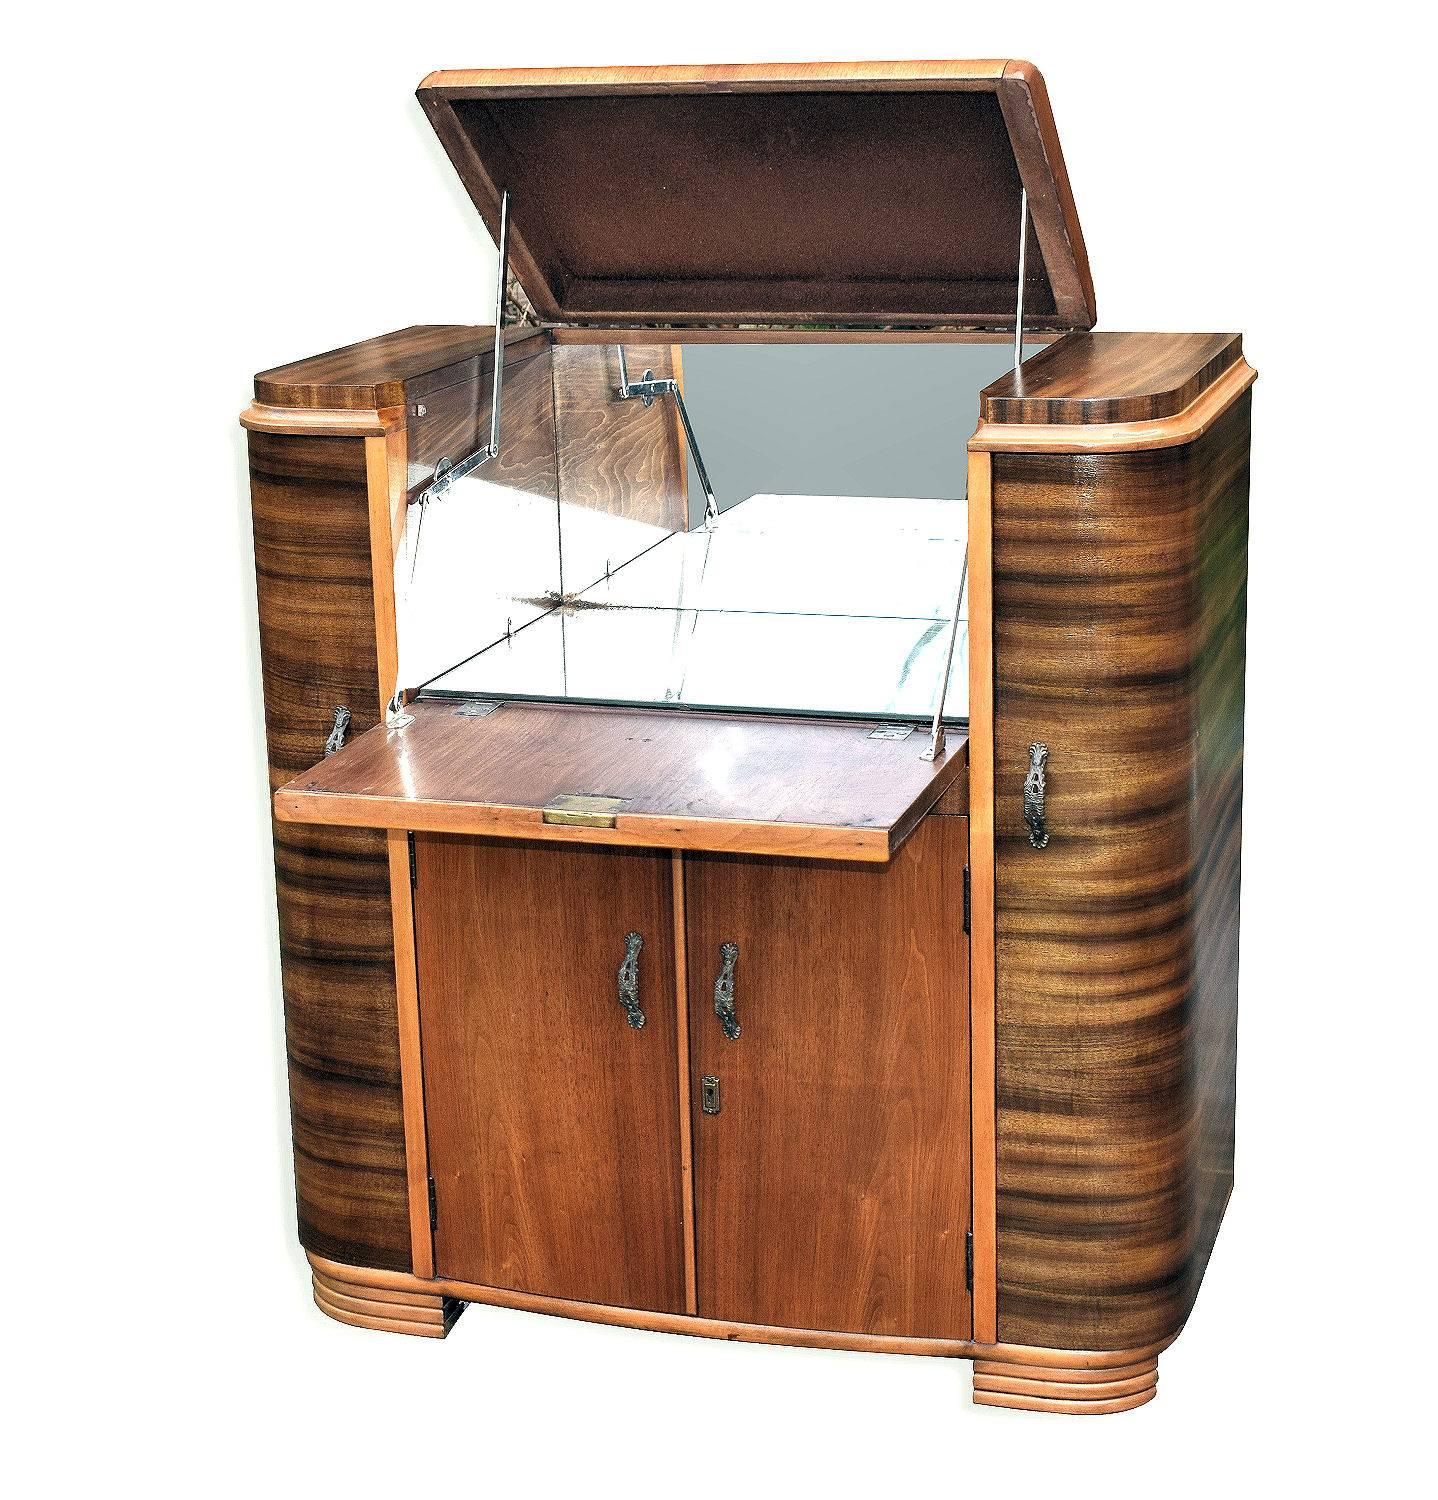 This really is a wonderful cocktail cabinet; the shape is superb and reminds of the old 1930s radiogram cabinets. Two contrasting walnut veneers, English and Australian. Typically of these cabinets the top opens up to reveal a mirrored interior,